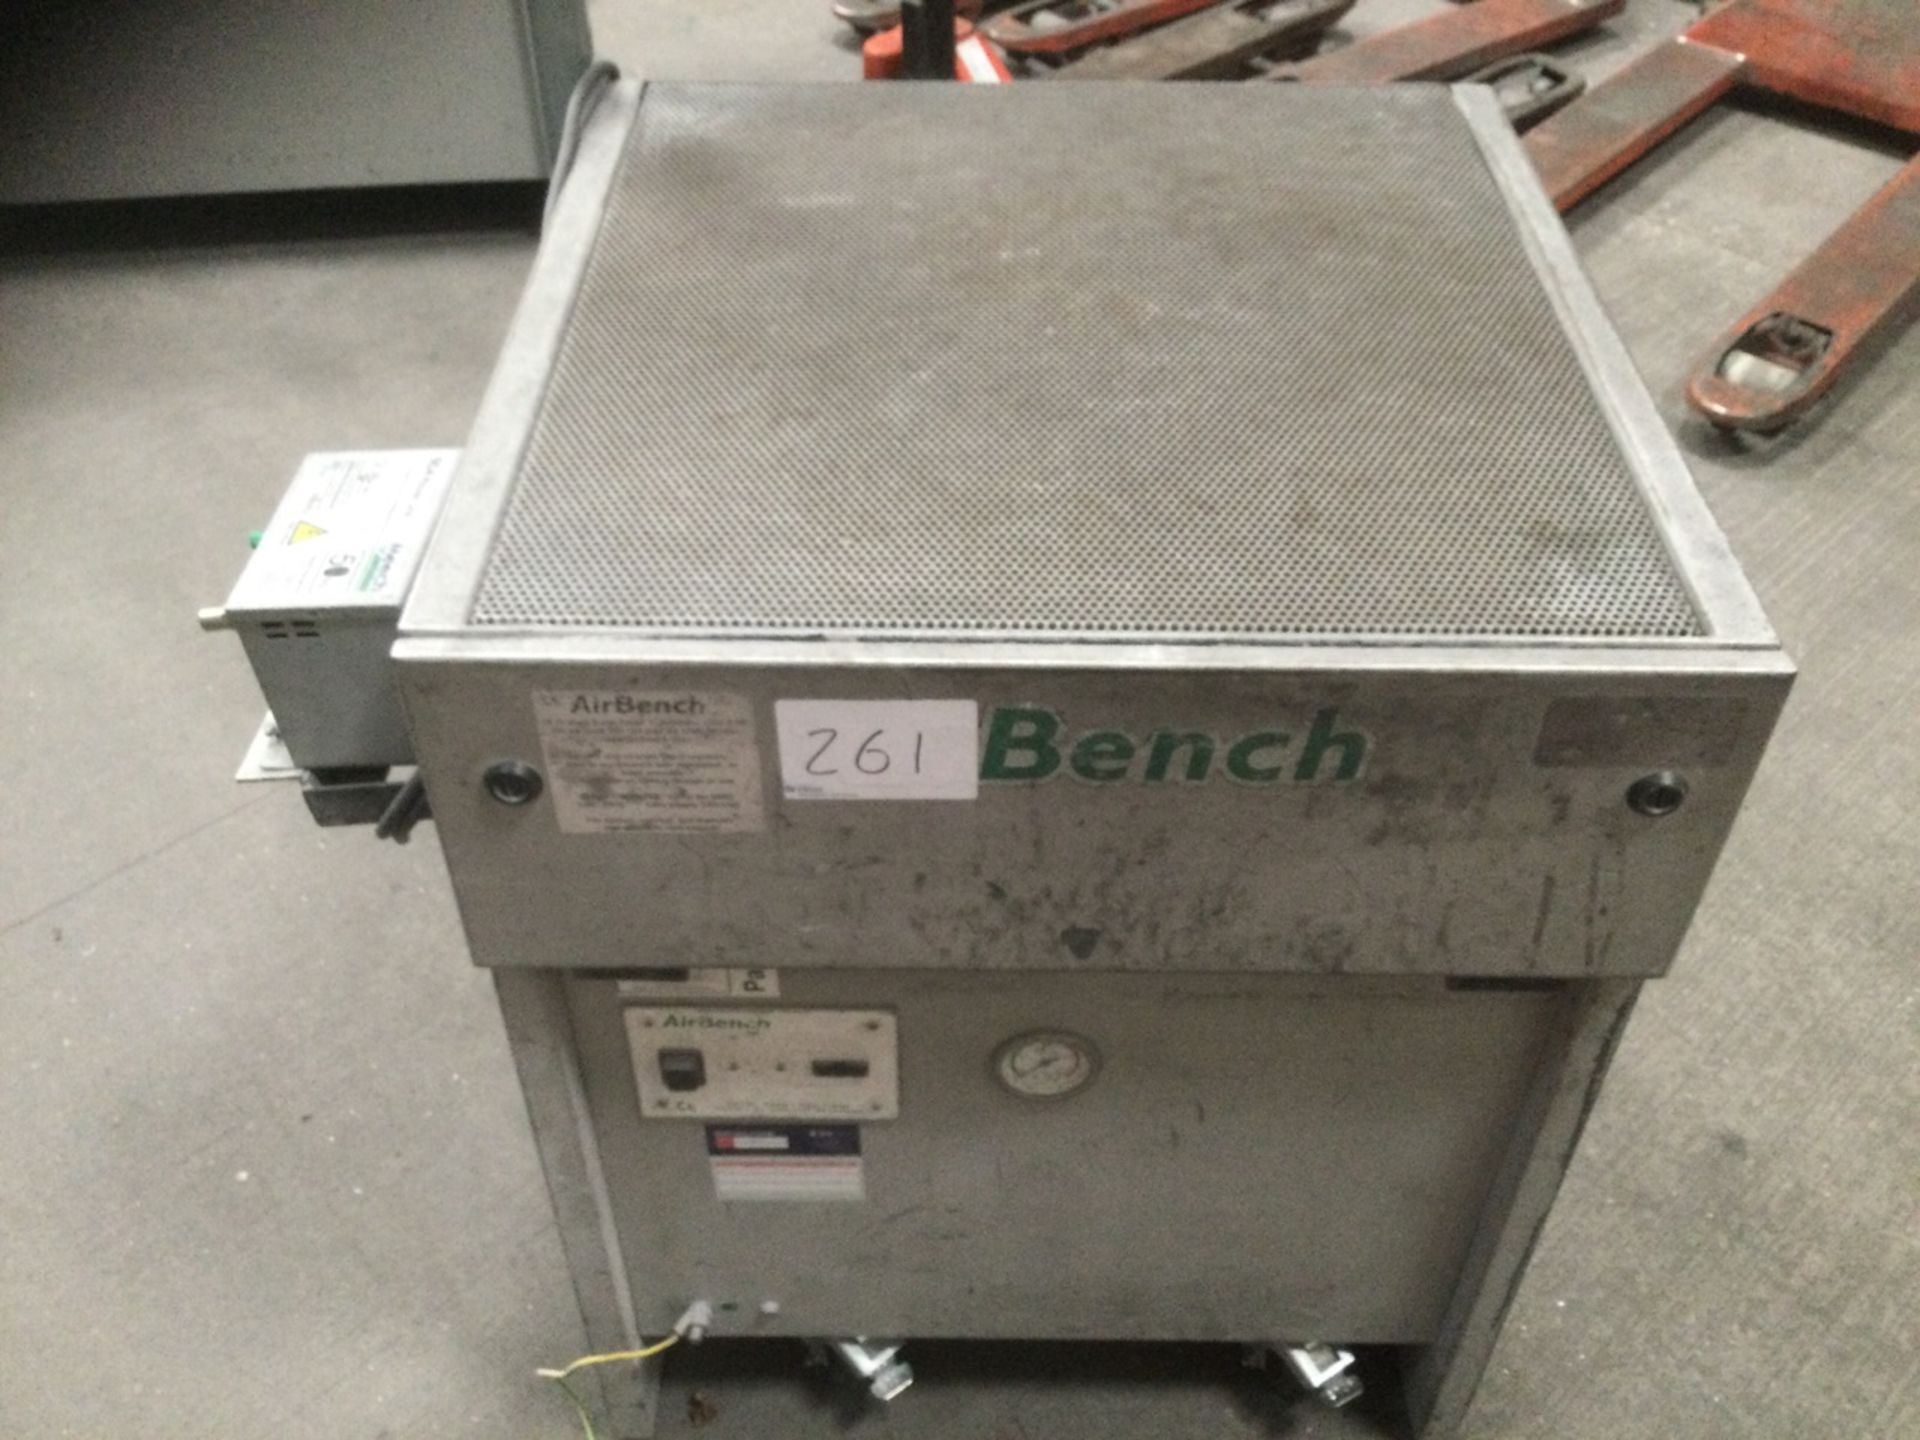 Air Bench FN066784 Down Draught Work Bench, Approximately 60cm X 60cm, serial number 9889 , year 20